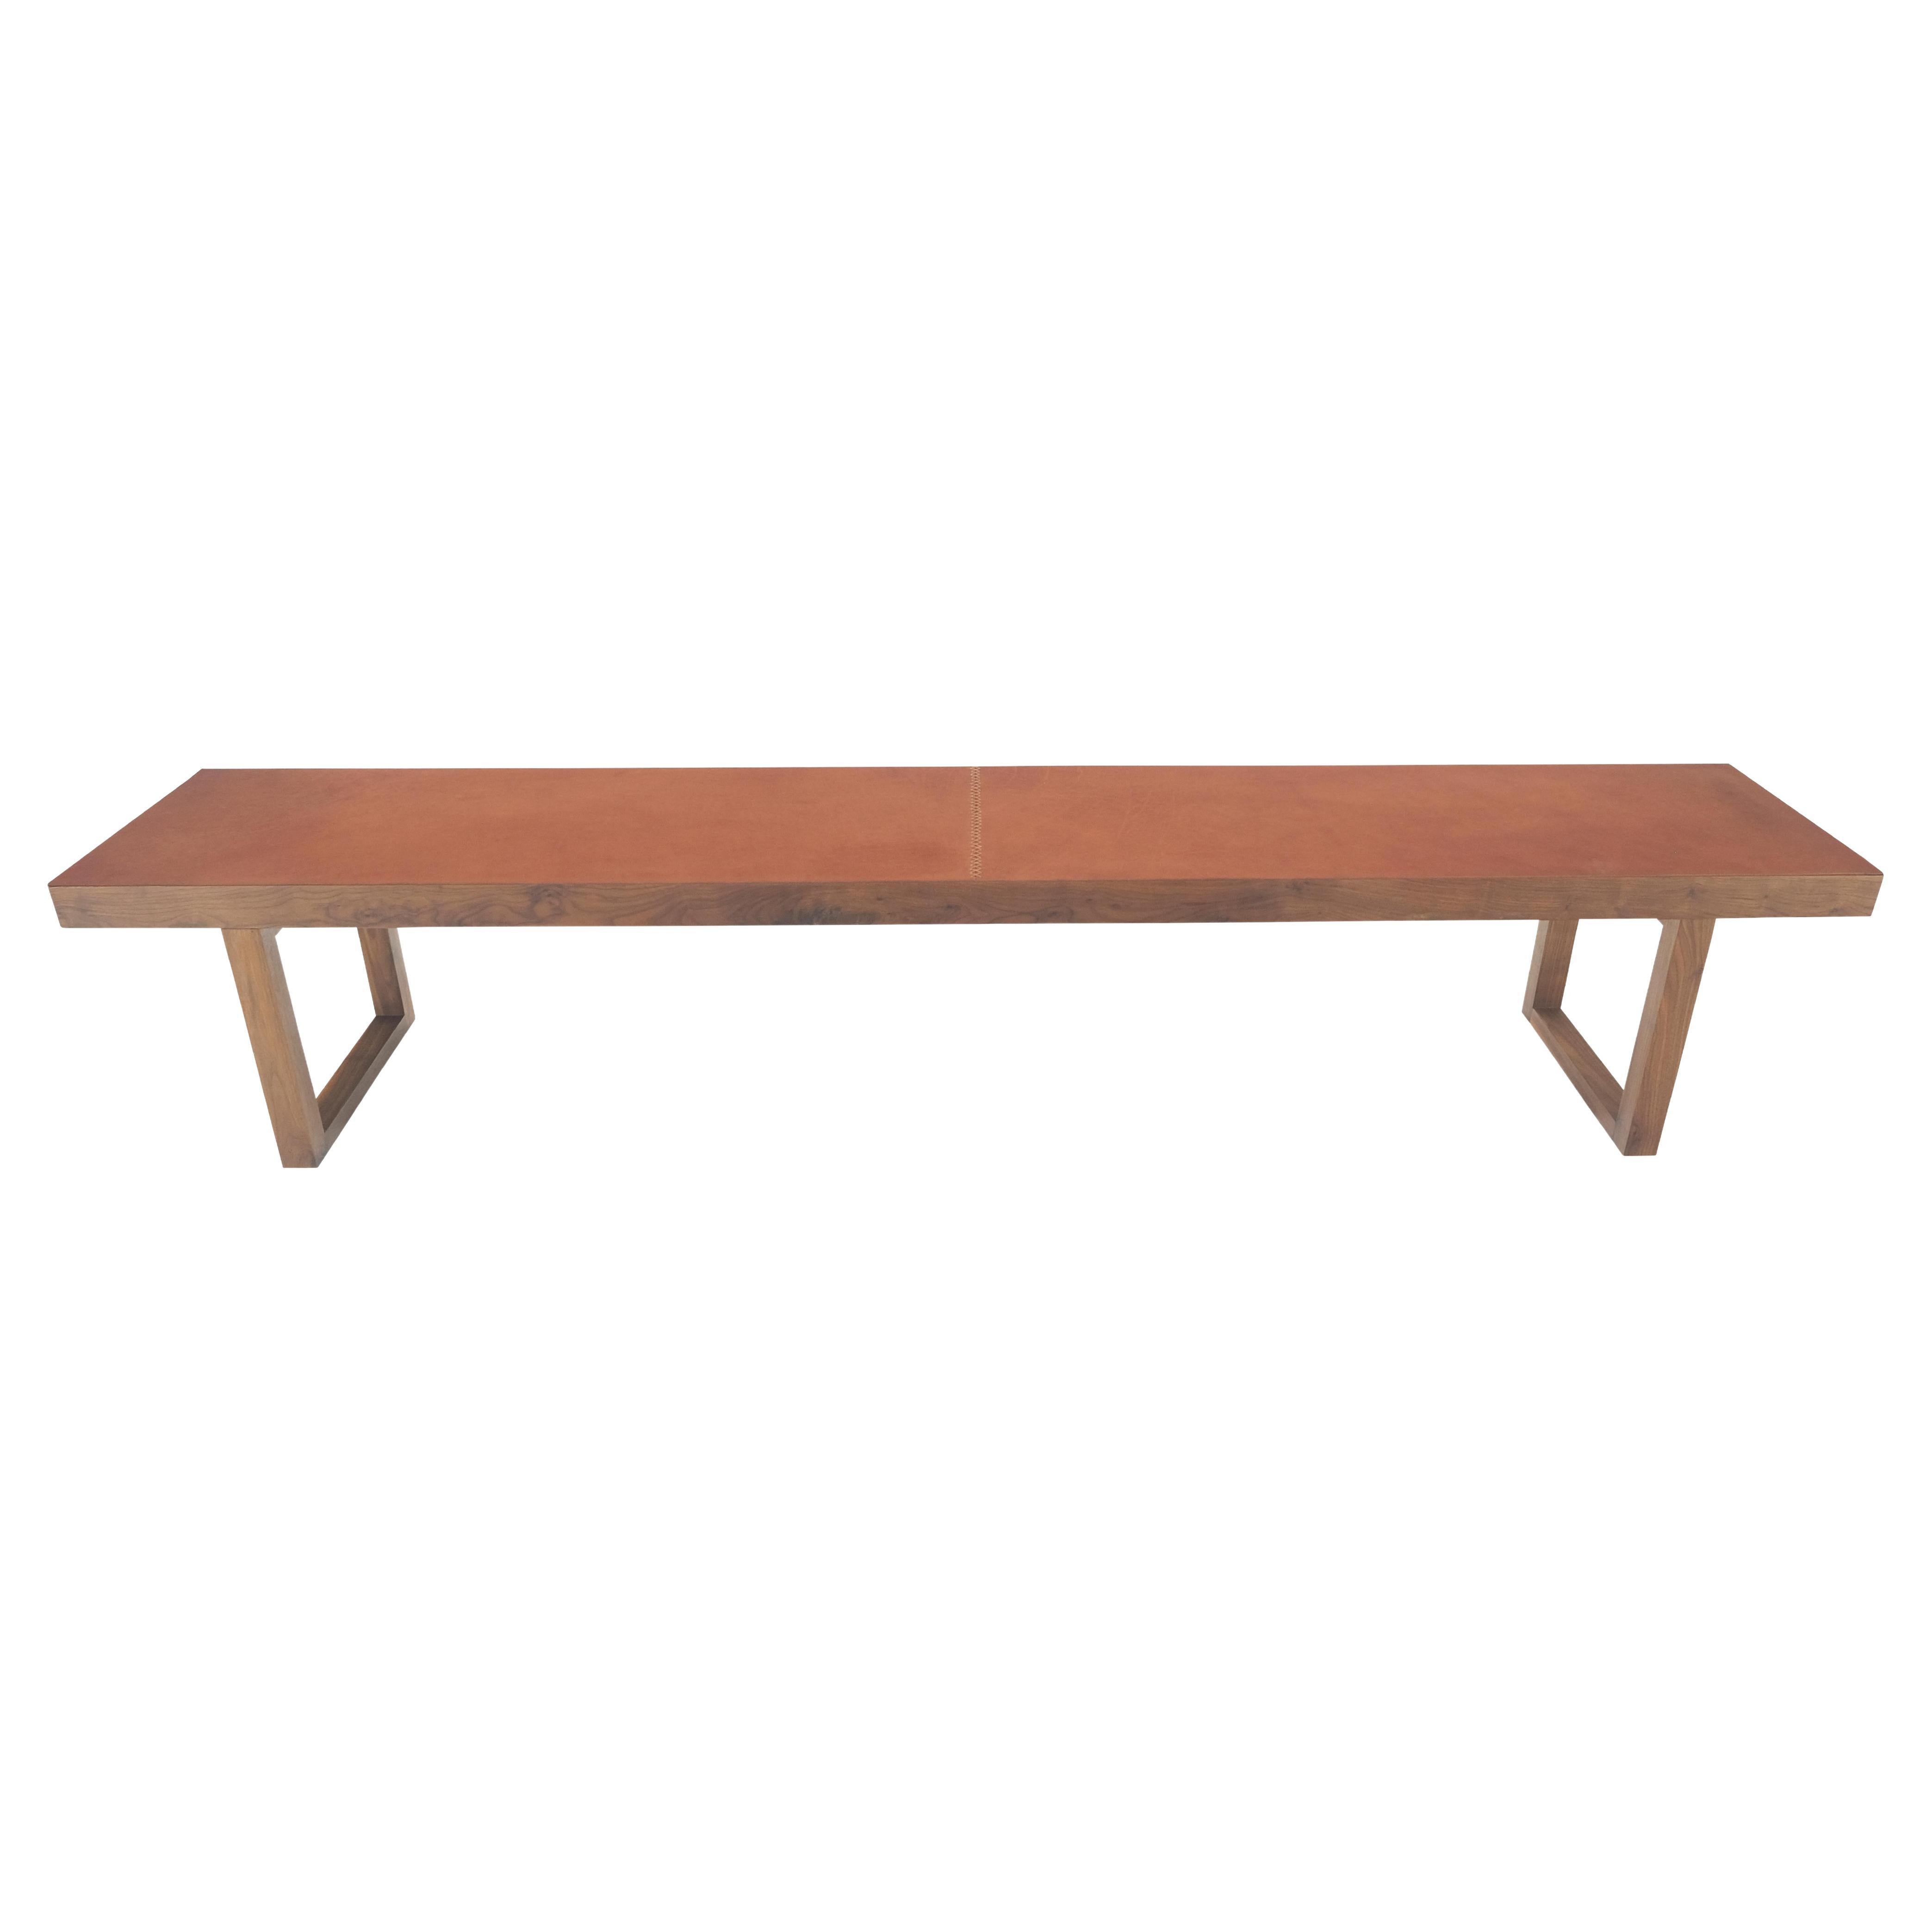 Slim Profile Solid Walnut Frame Integrated leather Cushion 7.5' Long Bench